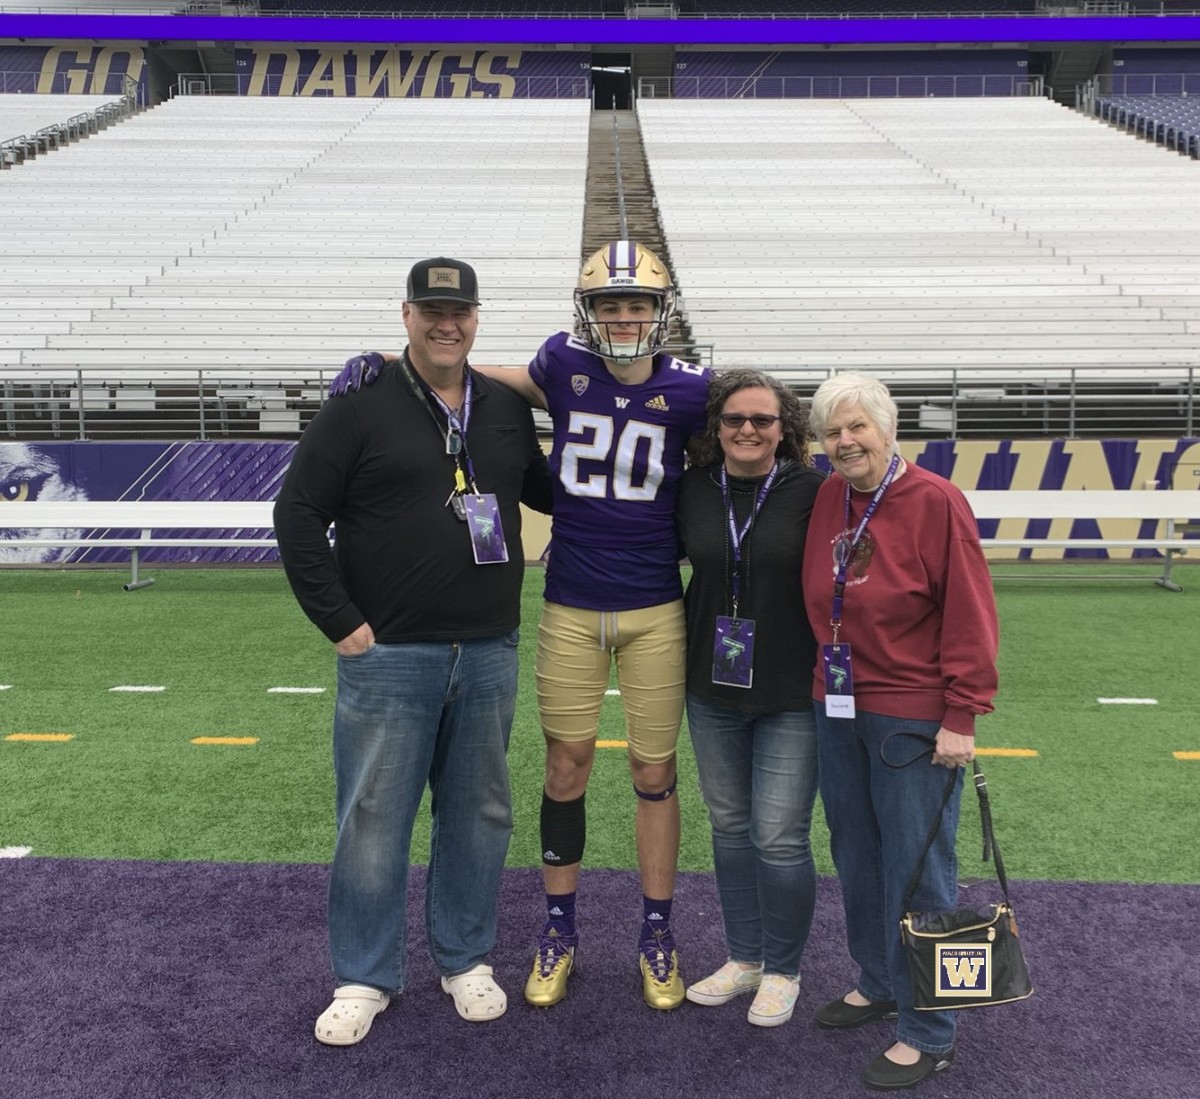 Brock Harris traveled to the UW with his family for a football visit.